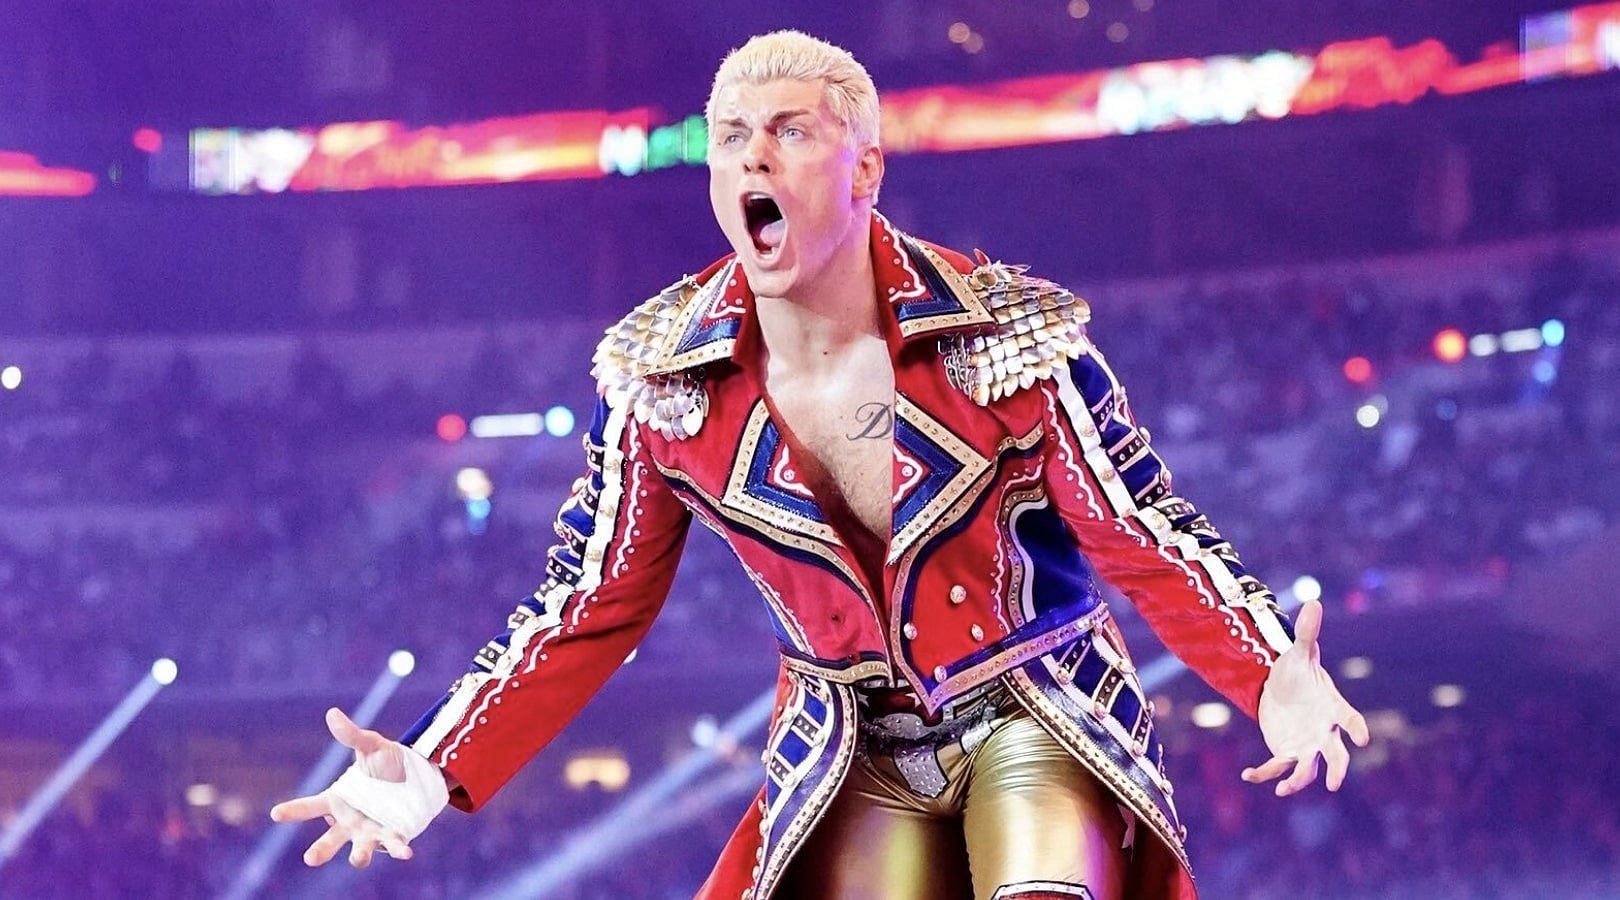 Cody Rhodes returned to WWE in 2022